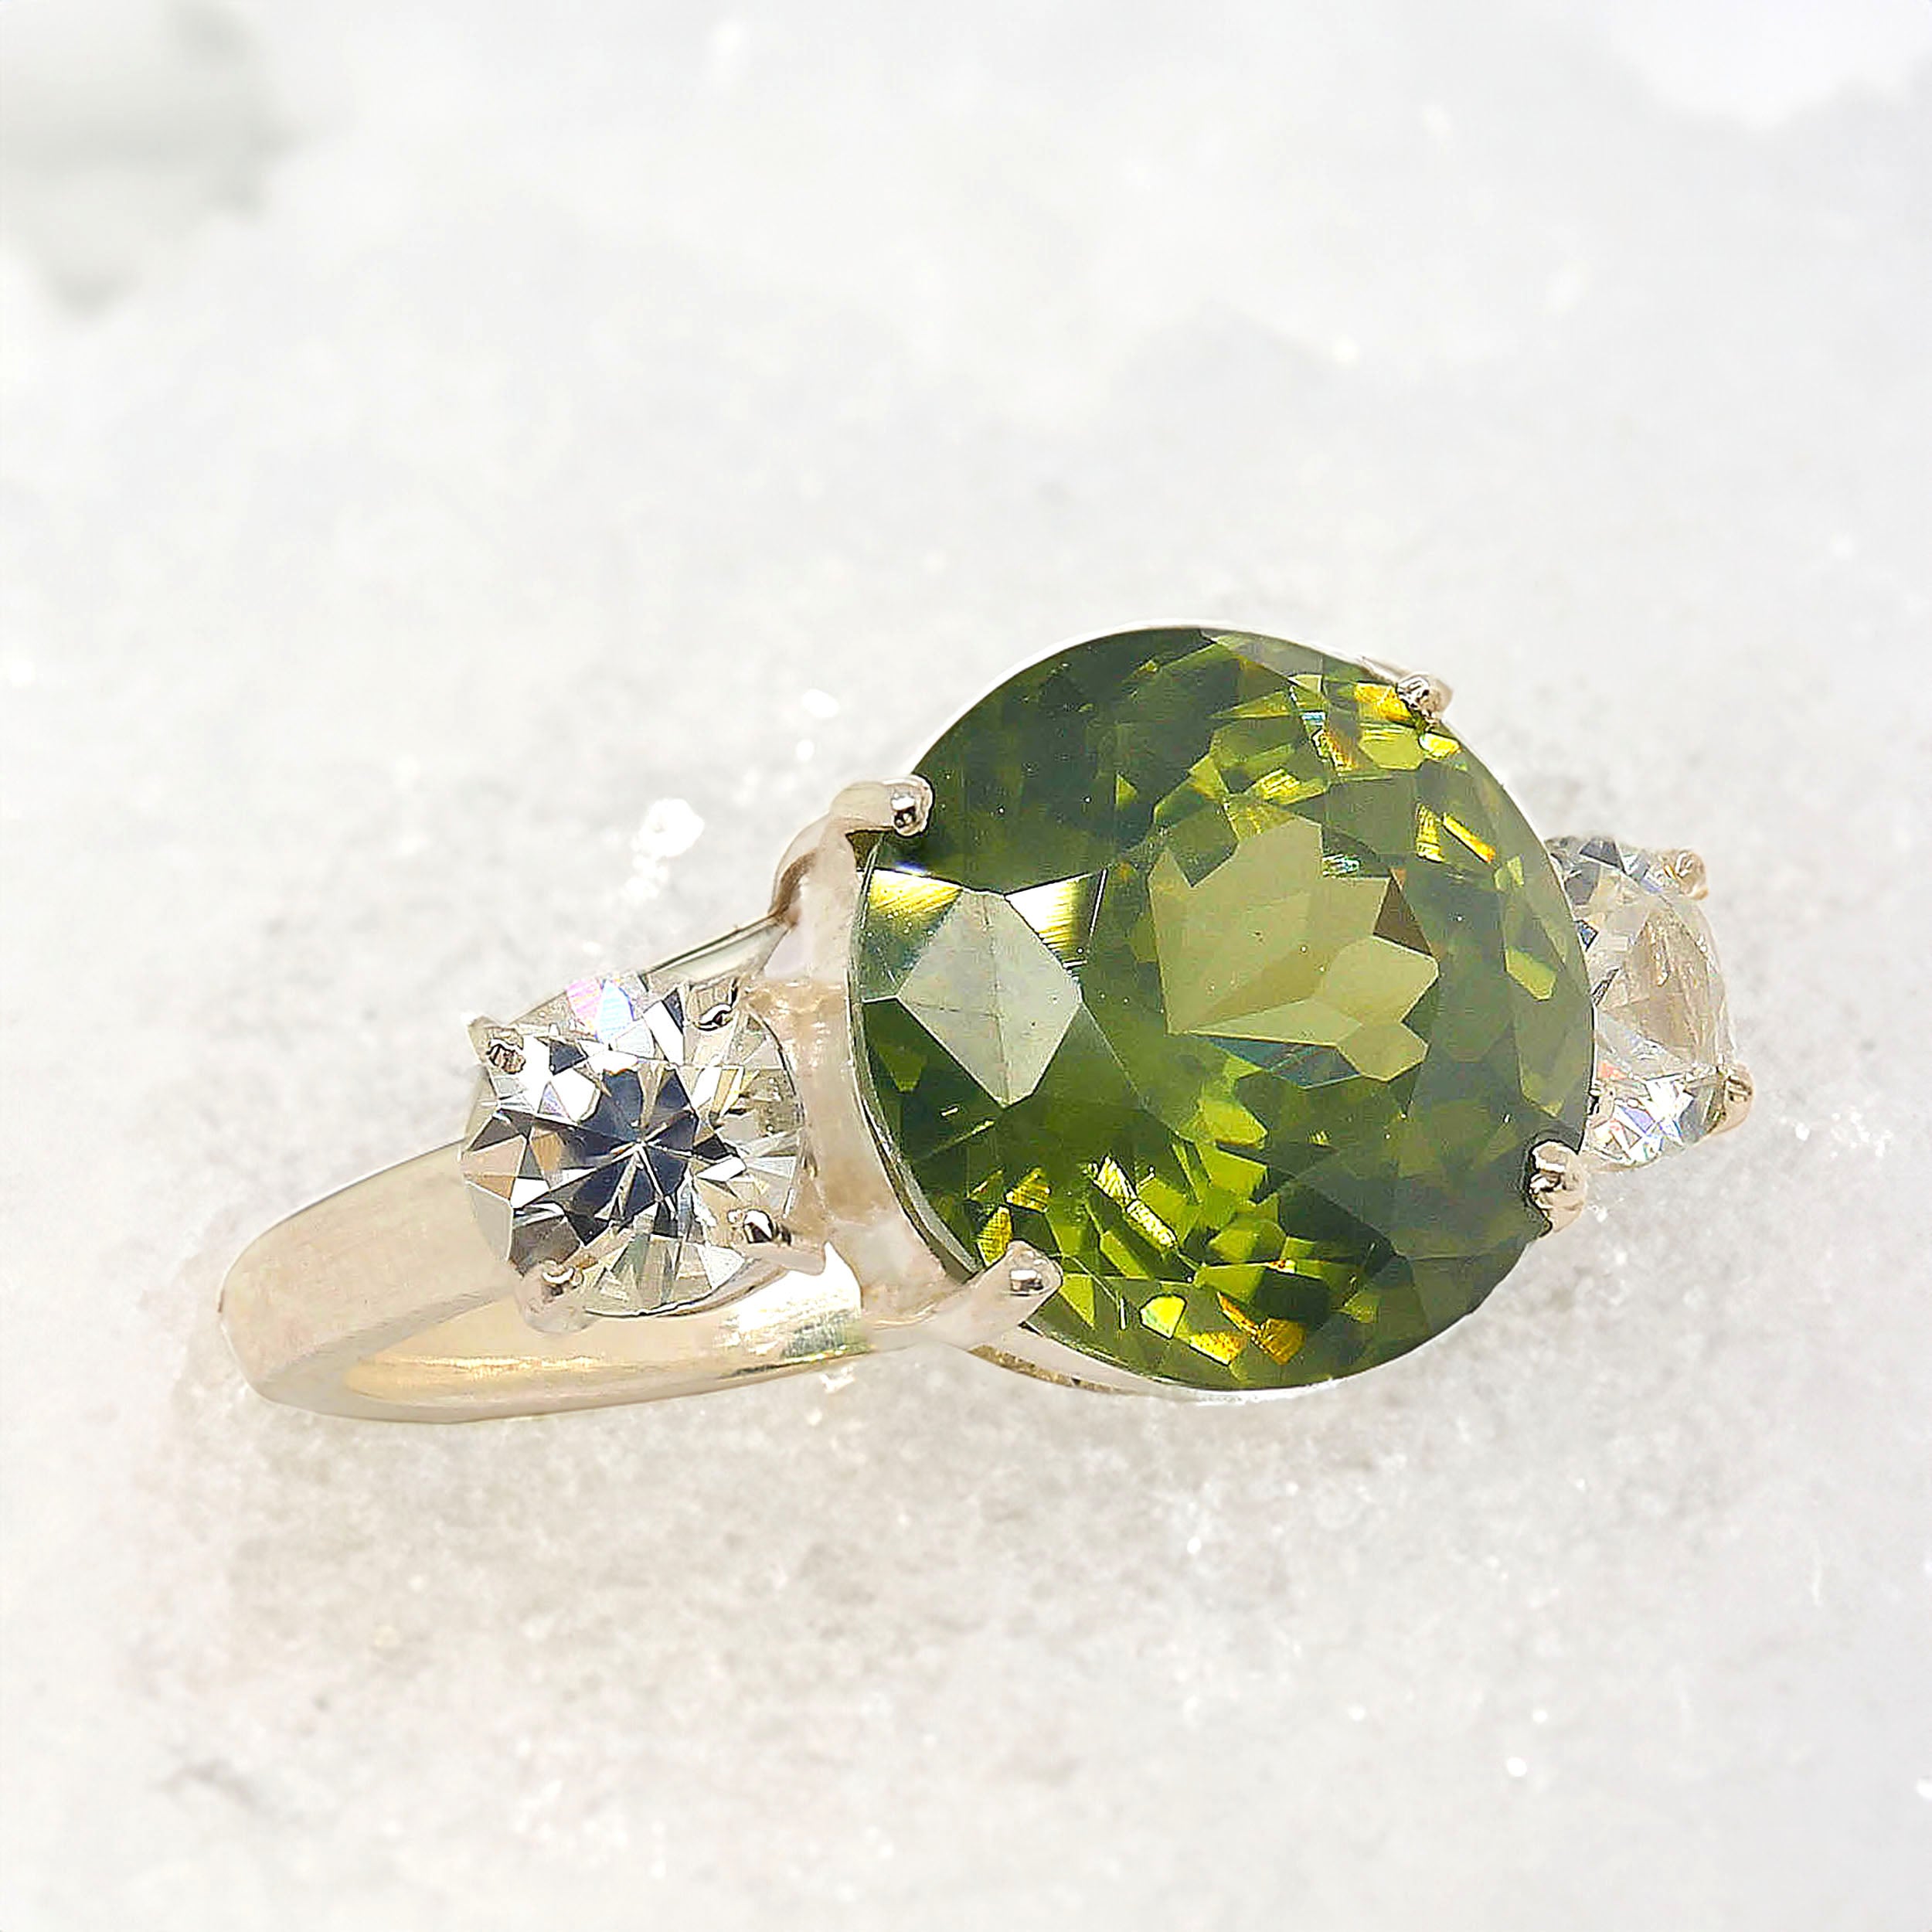 Cocktails will never look the same as you raise your glass!  This sophisticated green and white genuine Zircon Cocktail ring is a show stopper.  The gorgeous round 7.51 carat  green Zircon is enhanced with round white sides stones total 1.47 carats.